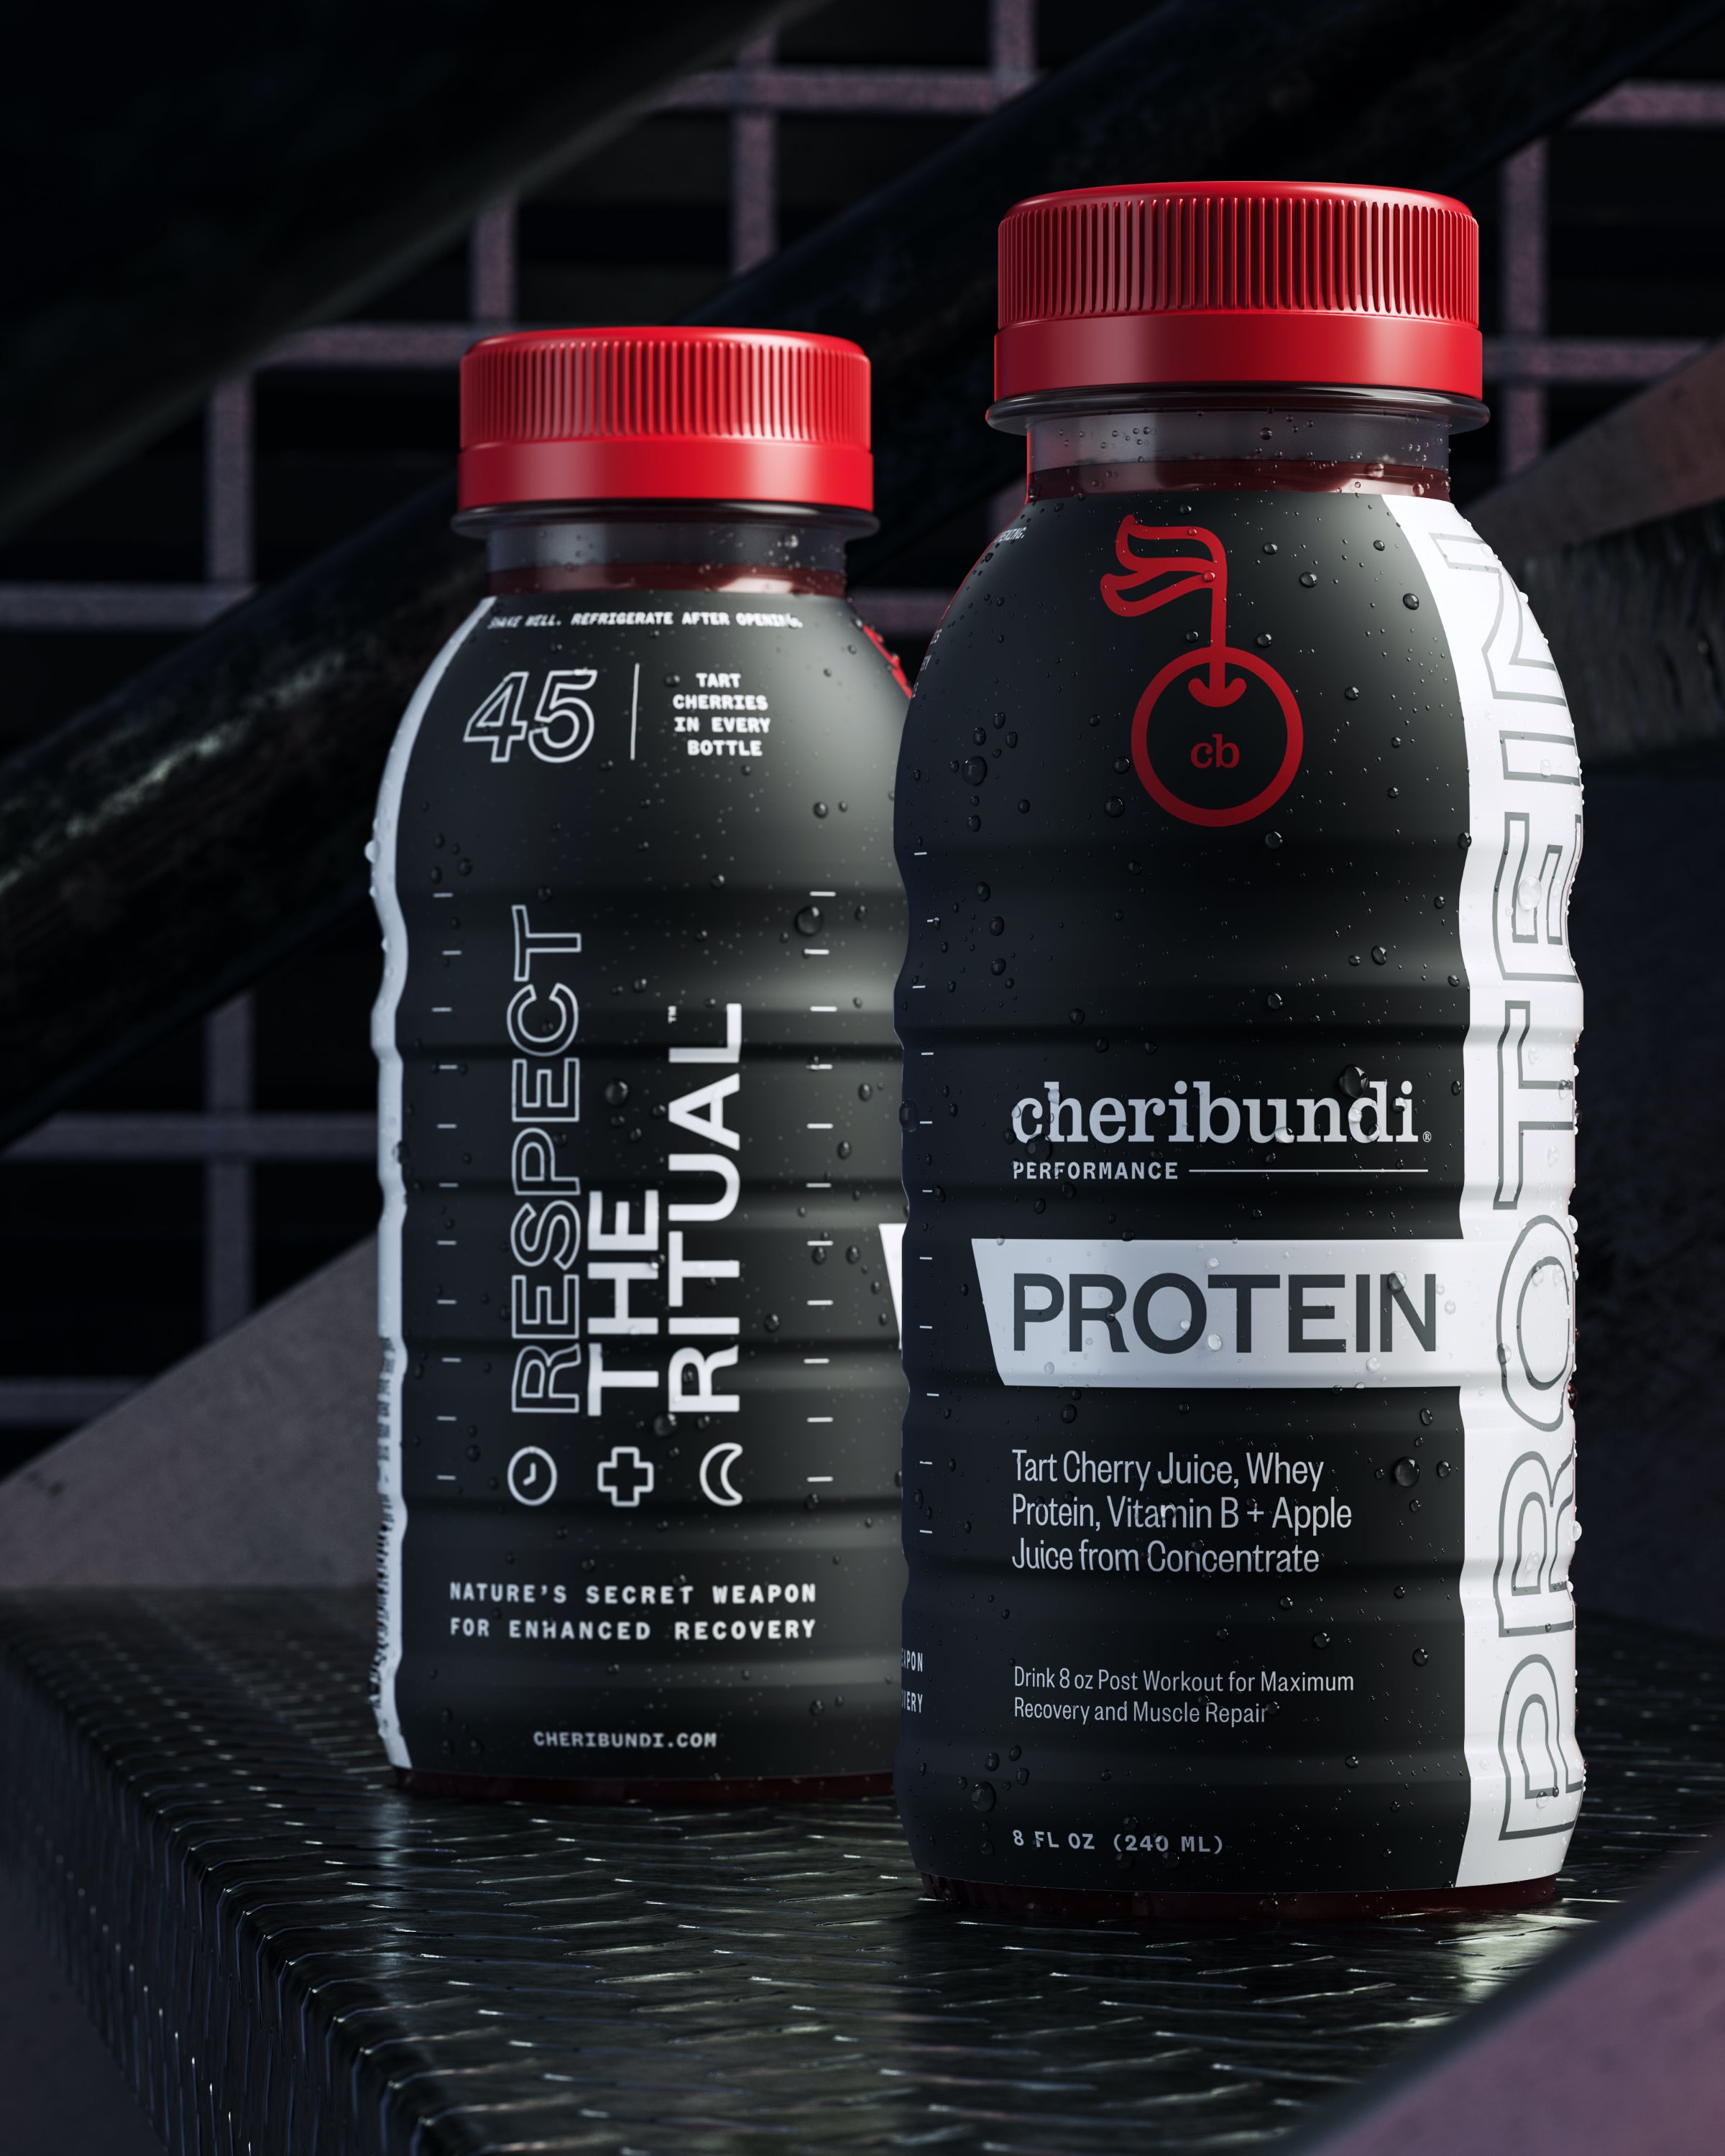 Protein product packaging